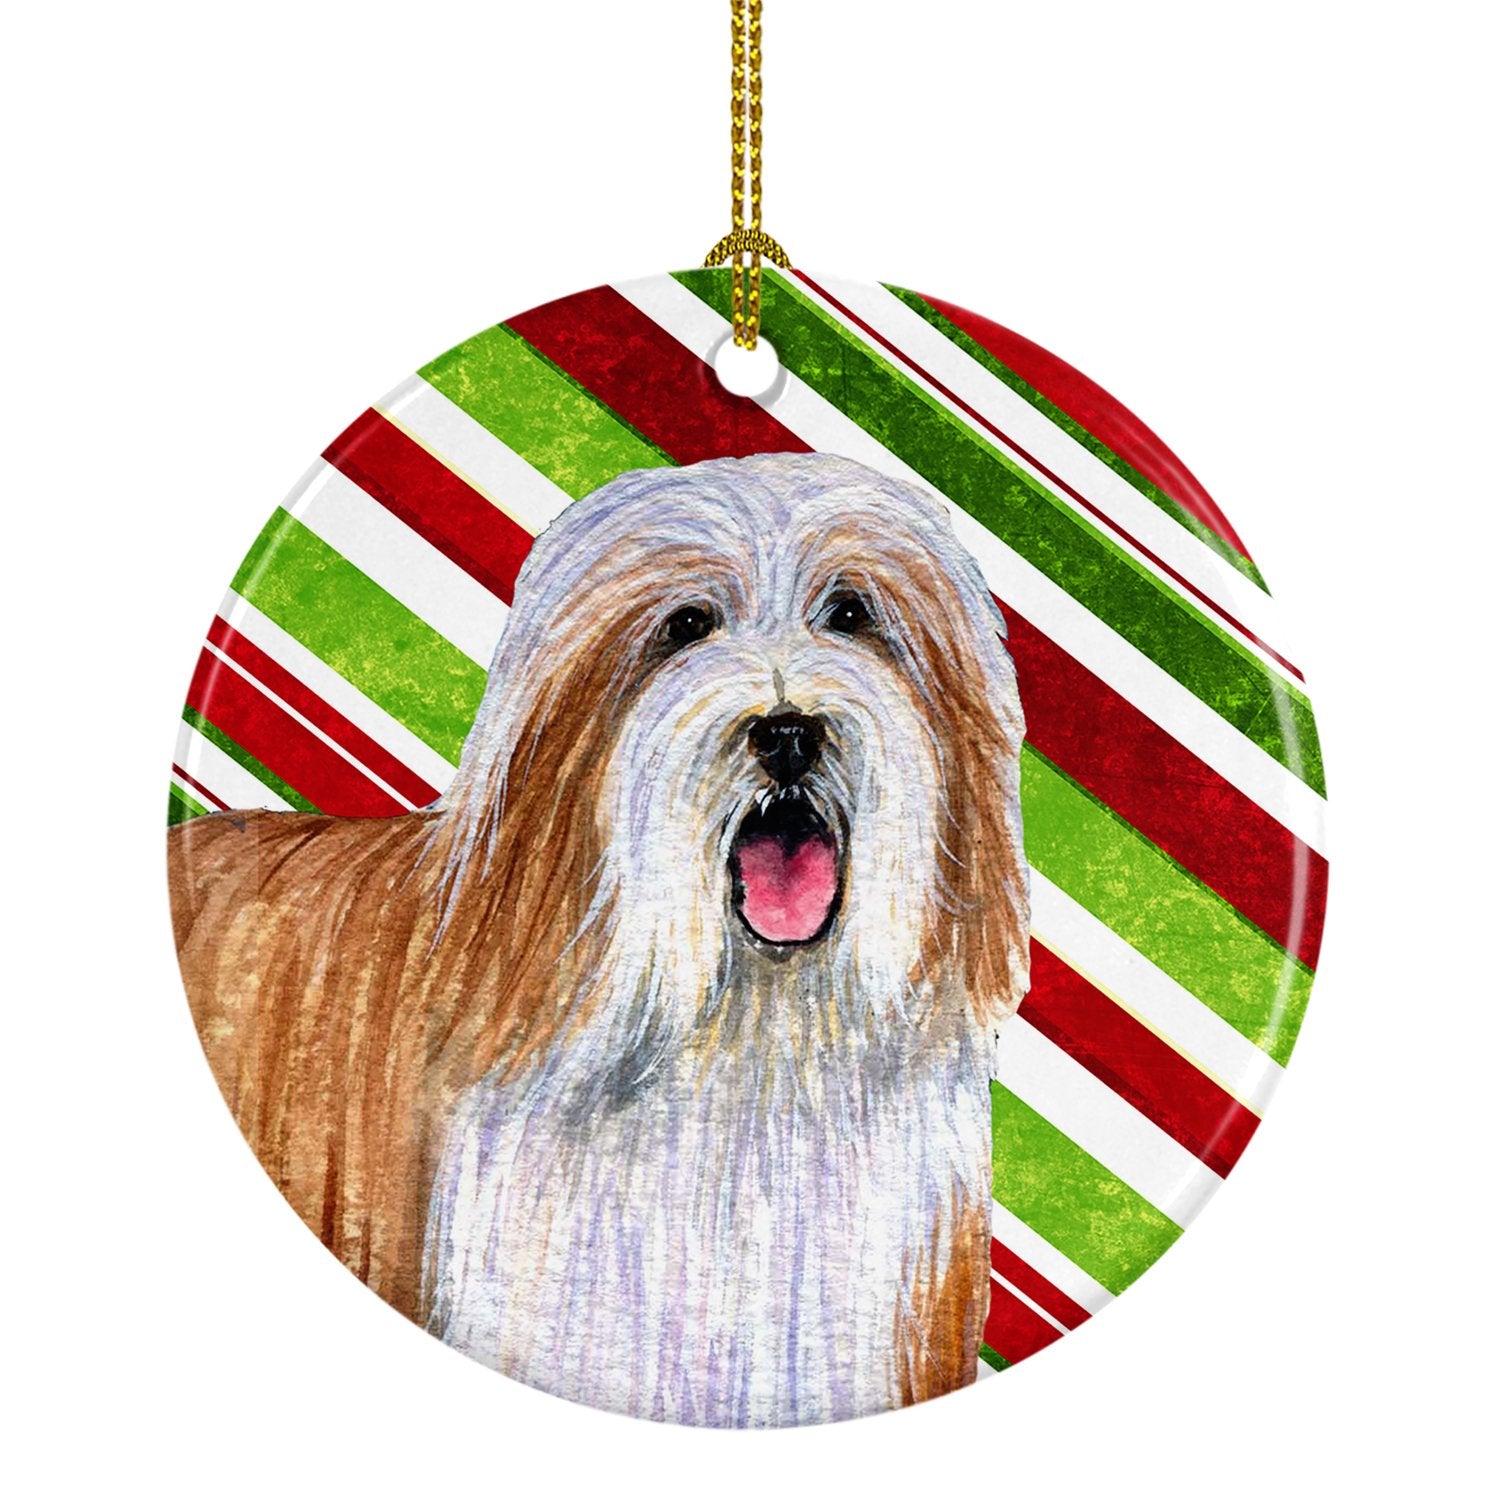 Bearded Collie Candy Cane Holiday Christmas Ceramic Ornament LH9240 by Caroline's Treasures